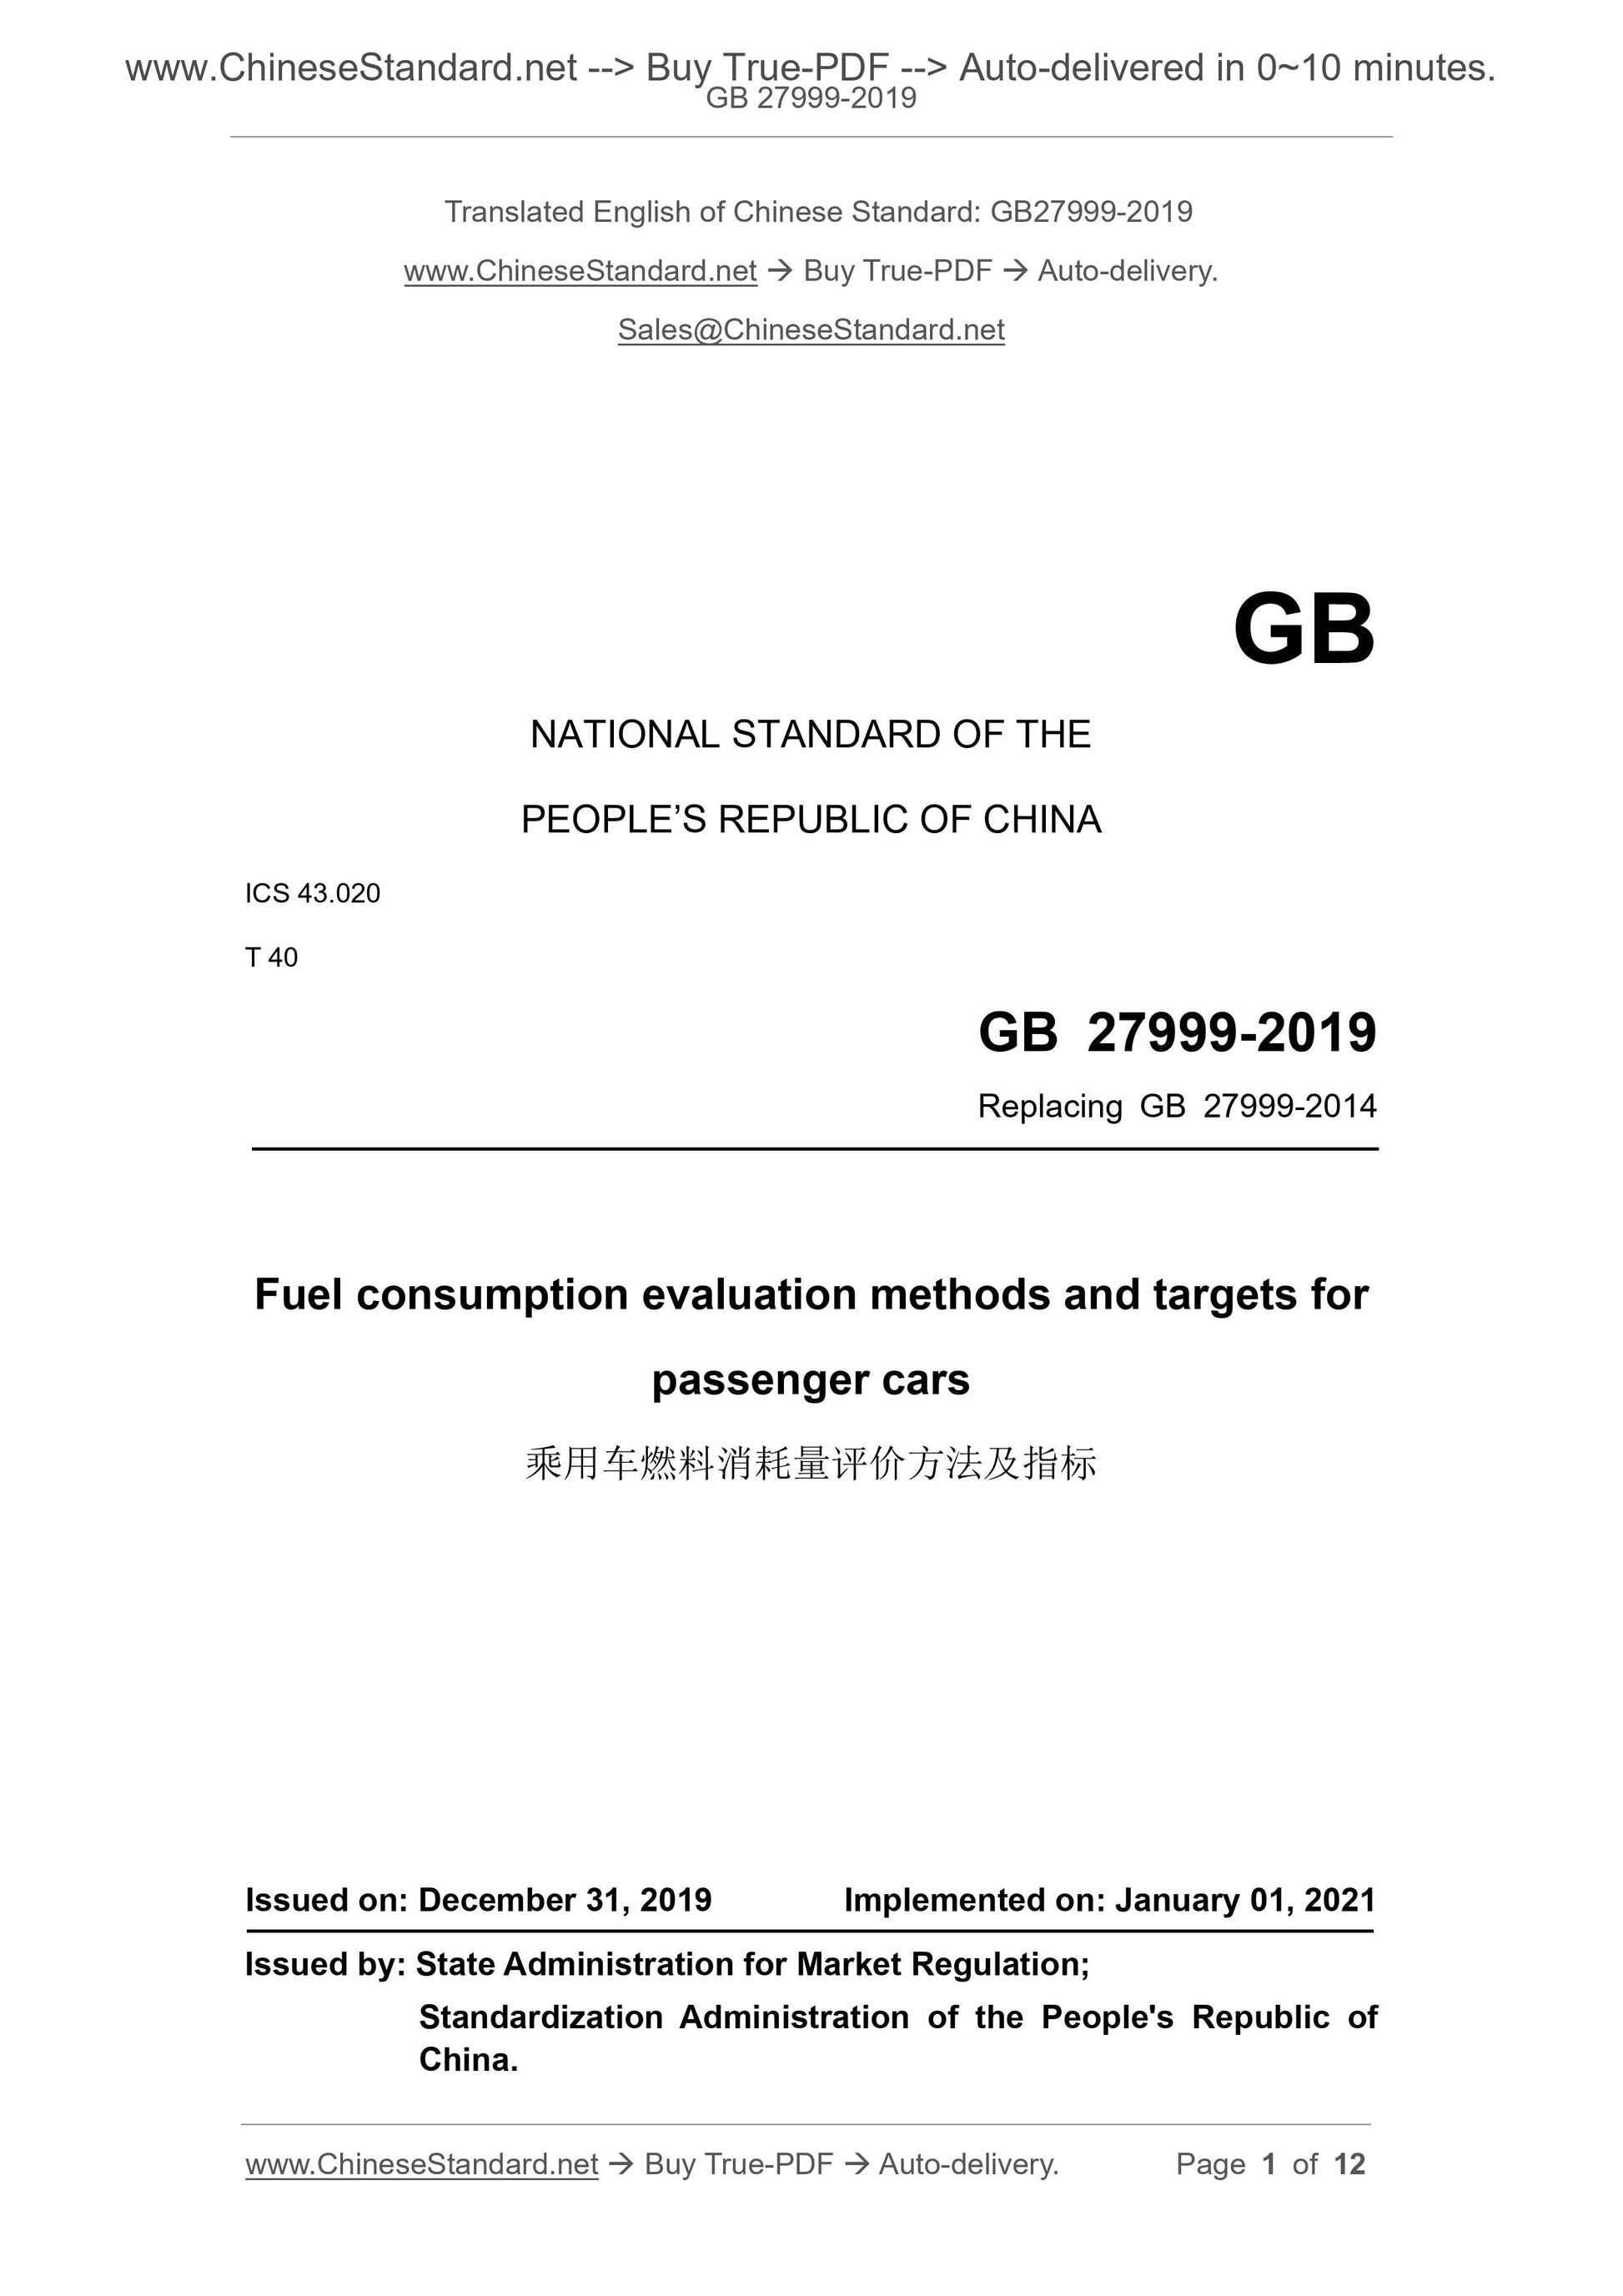 GB 27999-2019 Page 1